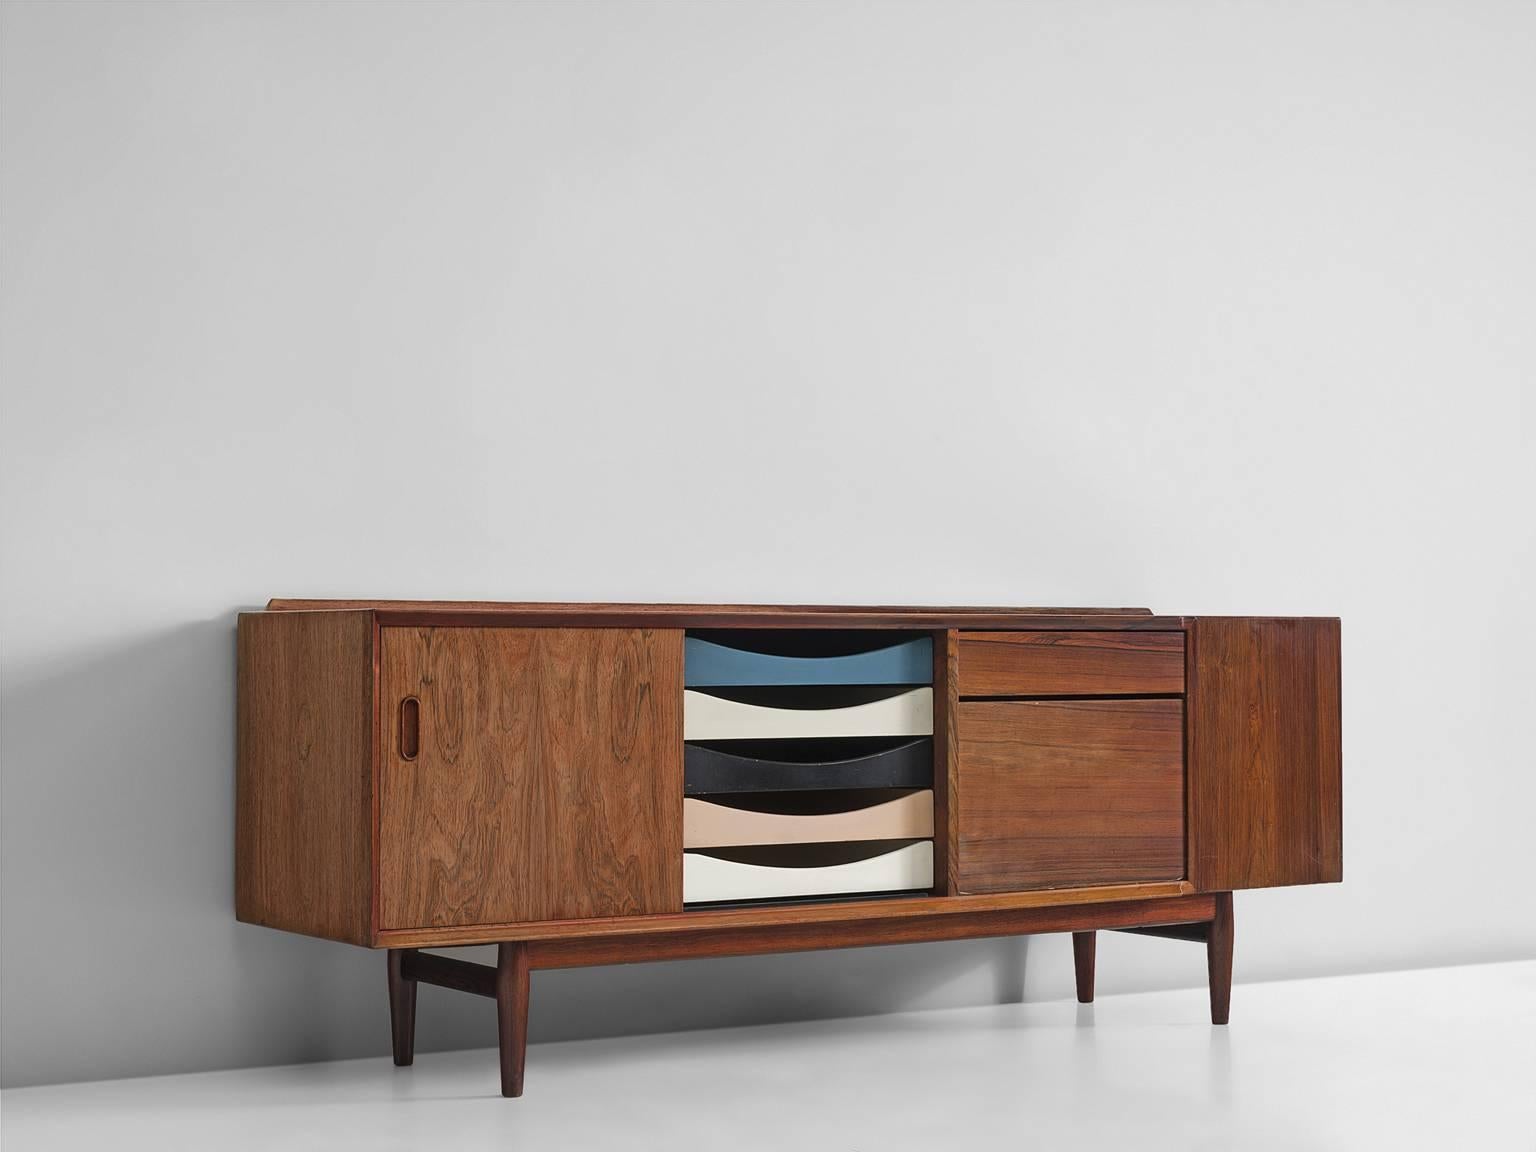 Sideboard, in rosewood, by Arne Vodder, Denmark, 1960s.

Small credenza in rosewood. Well designed sideboard with a sliding door and six concave shaped drawers. At the back of the top, a solid rosewood raised edge is made which gives the console a